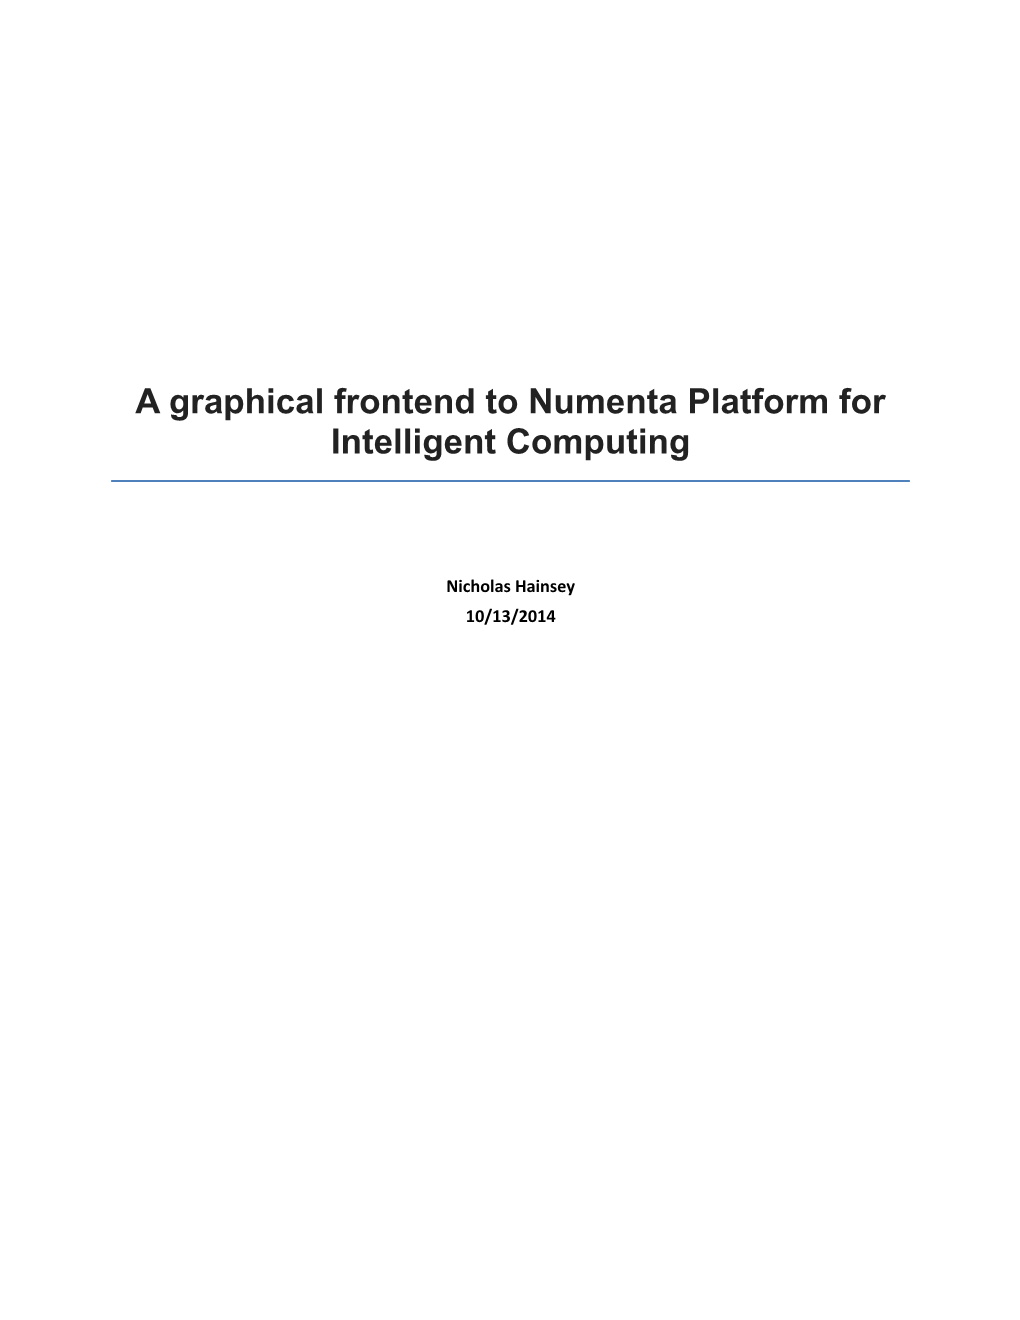 A Graphical Frontend to Numenta Platform for Intelligent Computing